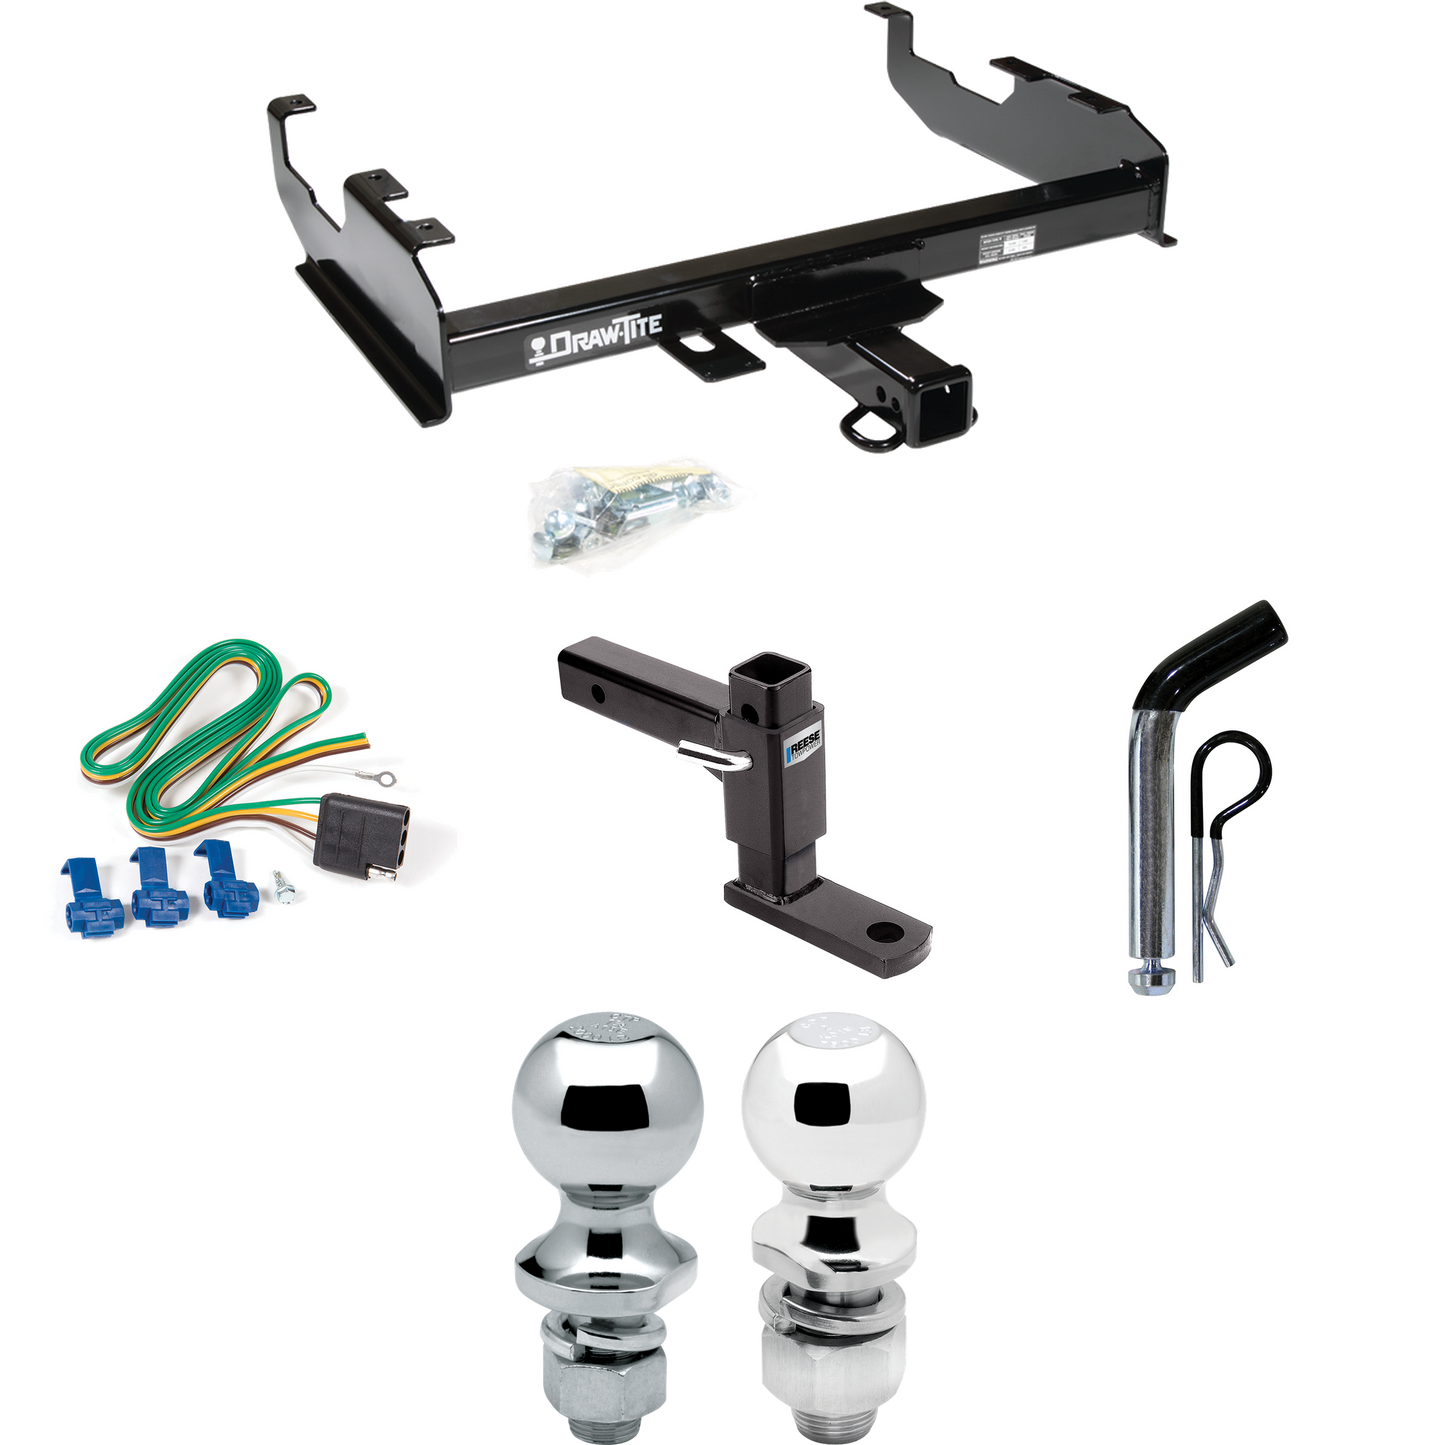 Fits 1963-1965 GMC 1000 Series Trailer Hitch Tow PKG w/ 4-Flat Wiring + Adjustable Drop Rise Ball Mount + Pin/Clip + 2" Ball + 1-7/8" Ball (For w/8' Bed Models) By Draw-Tite